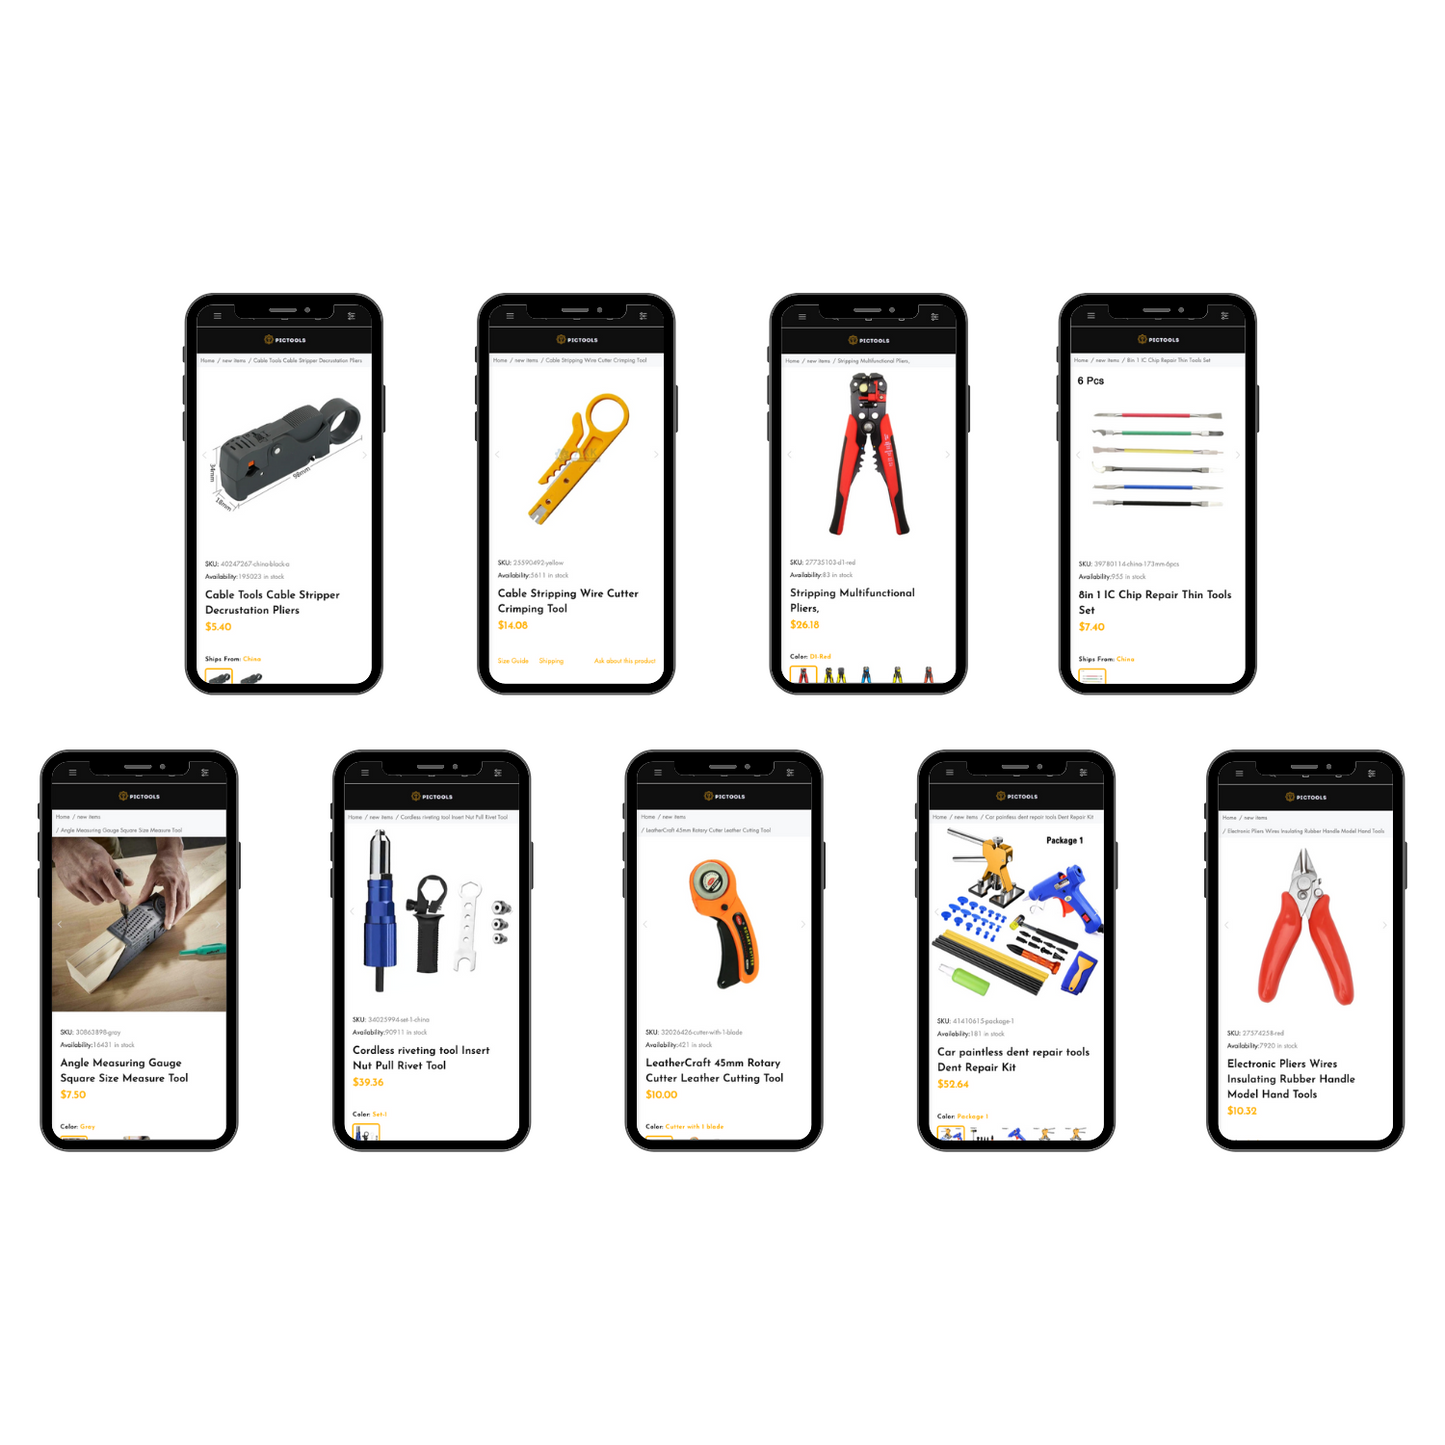 Pictools: Your Premier Prebuilt Shopify Store for Hardware Enthusiasts